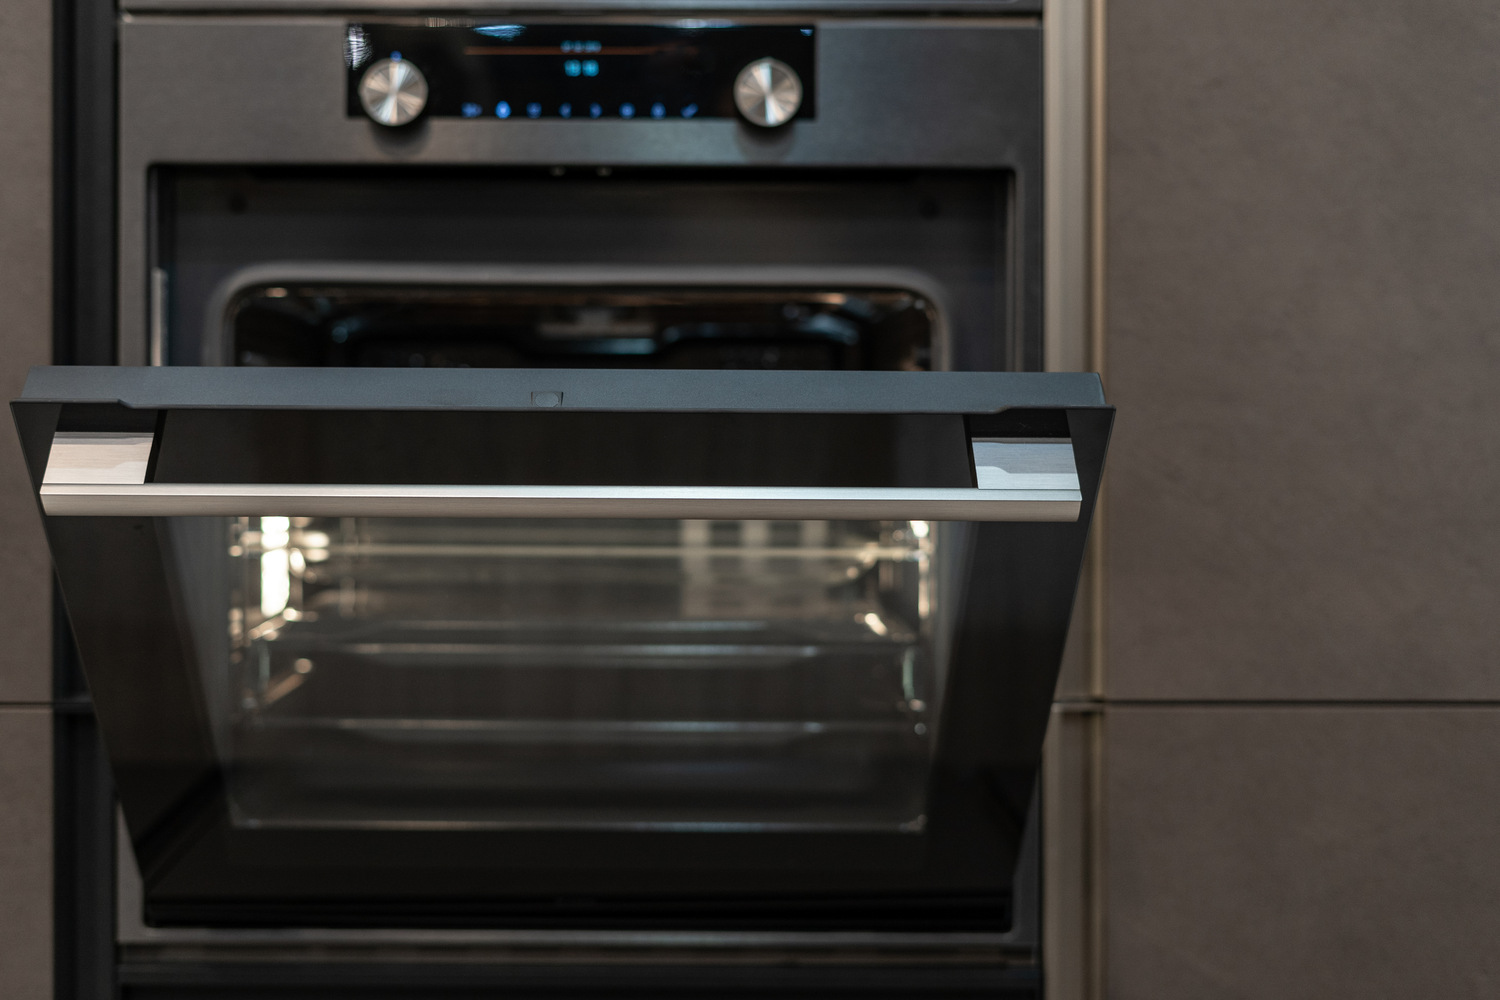 How To Fix The Error Code F4 For Maytag Oven